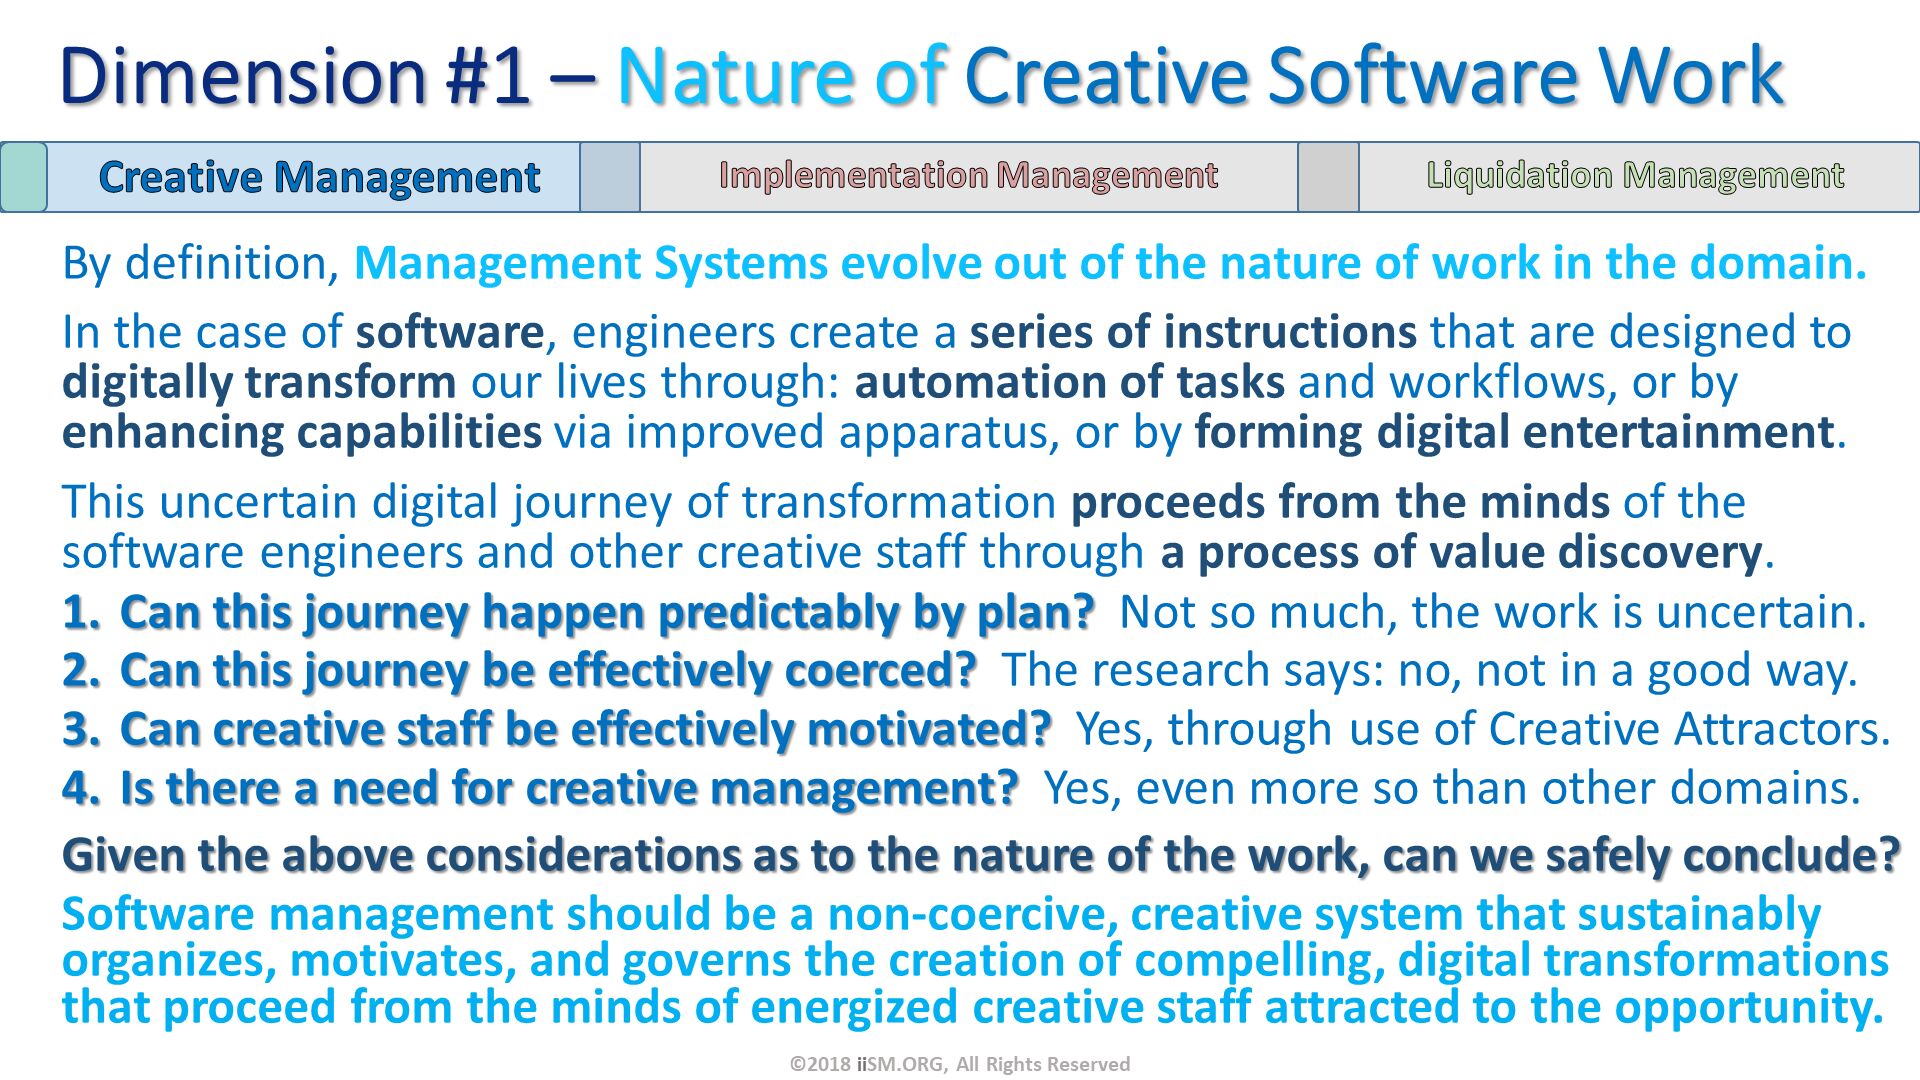 By definition, Management Systems evolve out of the nature of work in the domain.
In the case of software, engineers create a series of instructions that are designed to digitally transform our lives through: automation of tasks and workflows, or by enhancing capabilities via improved apparatus, or by forming digital entertainment.
This uncertain digital journey of transformation proceeds from the minds of the software engineers and other creative staff through a process of value discovery.
Can this journey happen predictably by plan?  Not so much, the work is uncertain.
Can this journey be effectively coerced?  The research says: no, not in a good way.
Can creative staff be effectively motivated?  Yes, through use of Creative Attractors.
Is there a need for creative management?  Yes, even more so than other domains.
Given the above considerations as to the nature of the work, can we safely conclude?
Software management should be a non-coercive, creative system that sustainably organizes, motivates, and governs the creation of compelling, digital transformations that proceed from the minds of energized creative staff attracted to the opportunity. Dimension #1 – Nature of Creative Software Work. ©2018 iiSM.ORG, All Rights Reserved. 